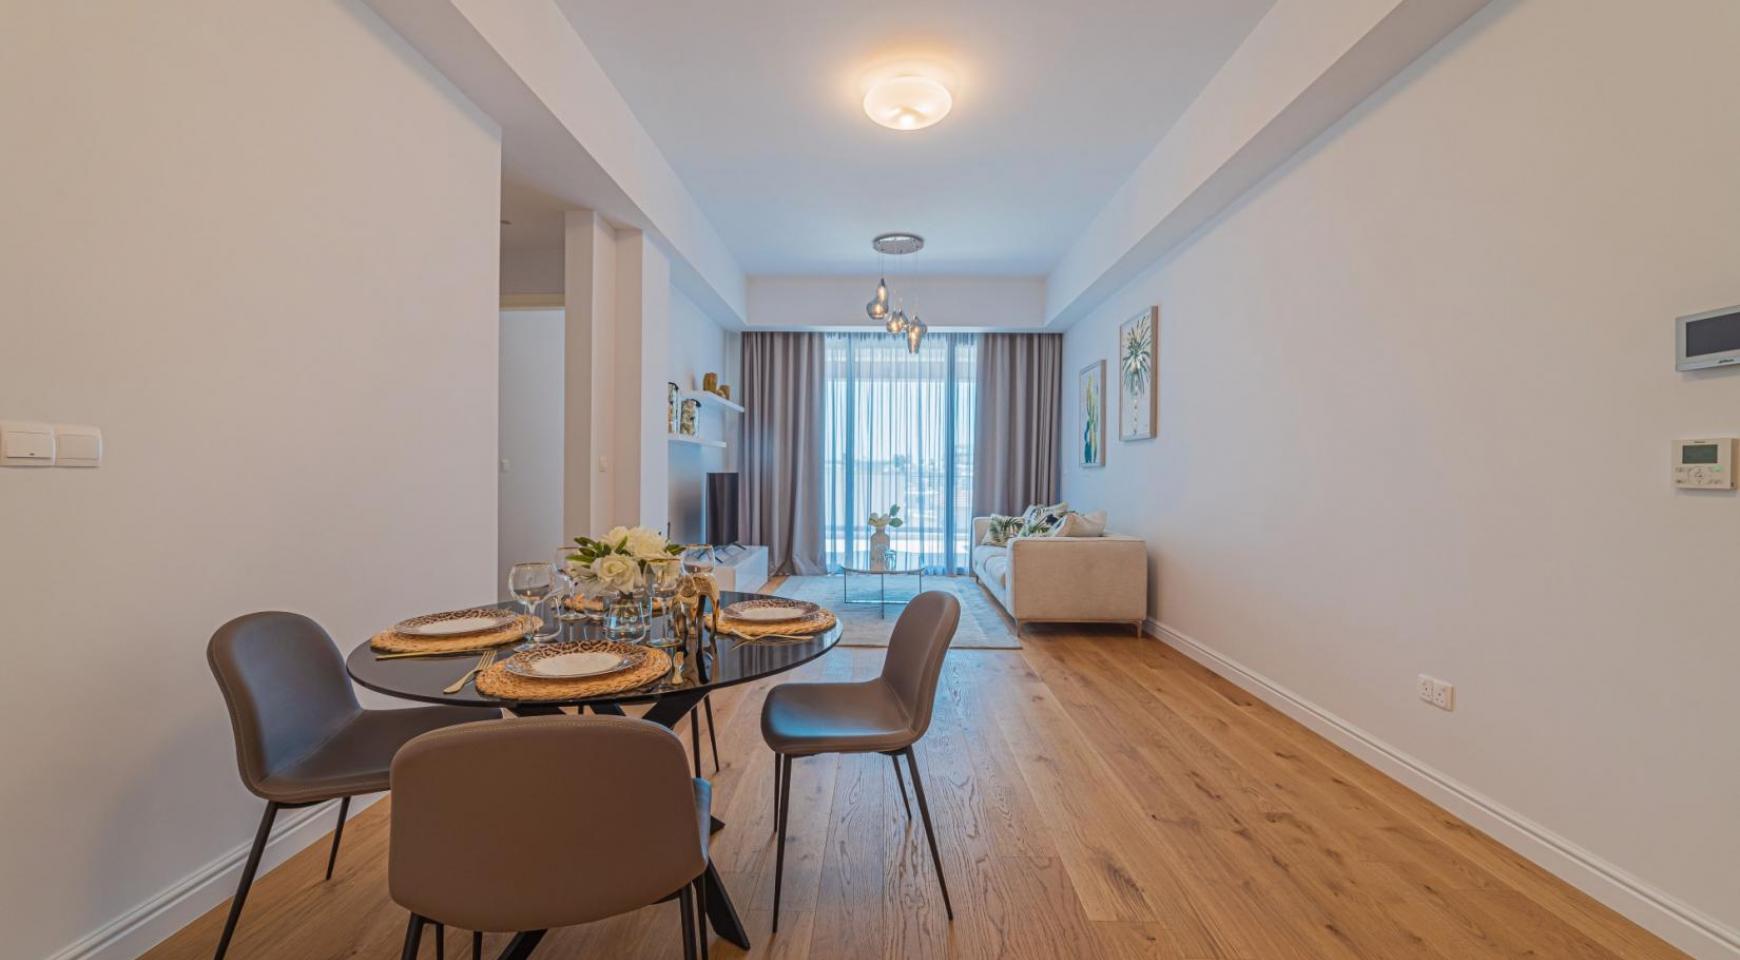 Hortensia Residence, Apt. 301. 2 Bedroom Apartment within a New Complex near the Sea  - 57